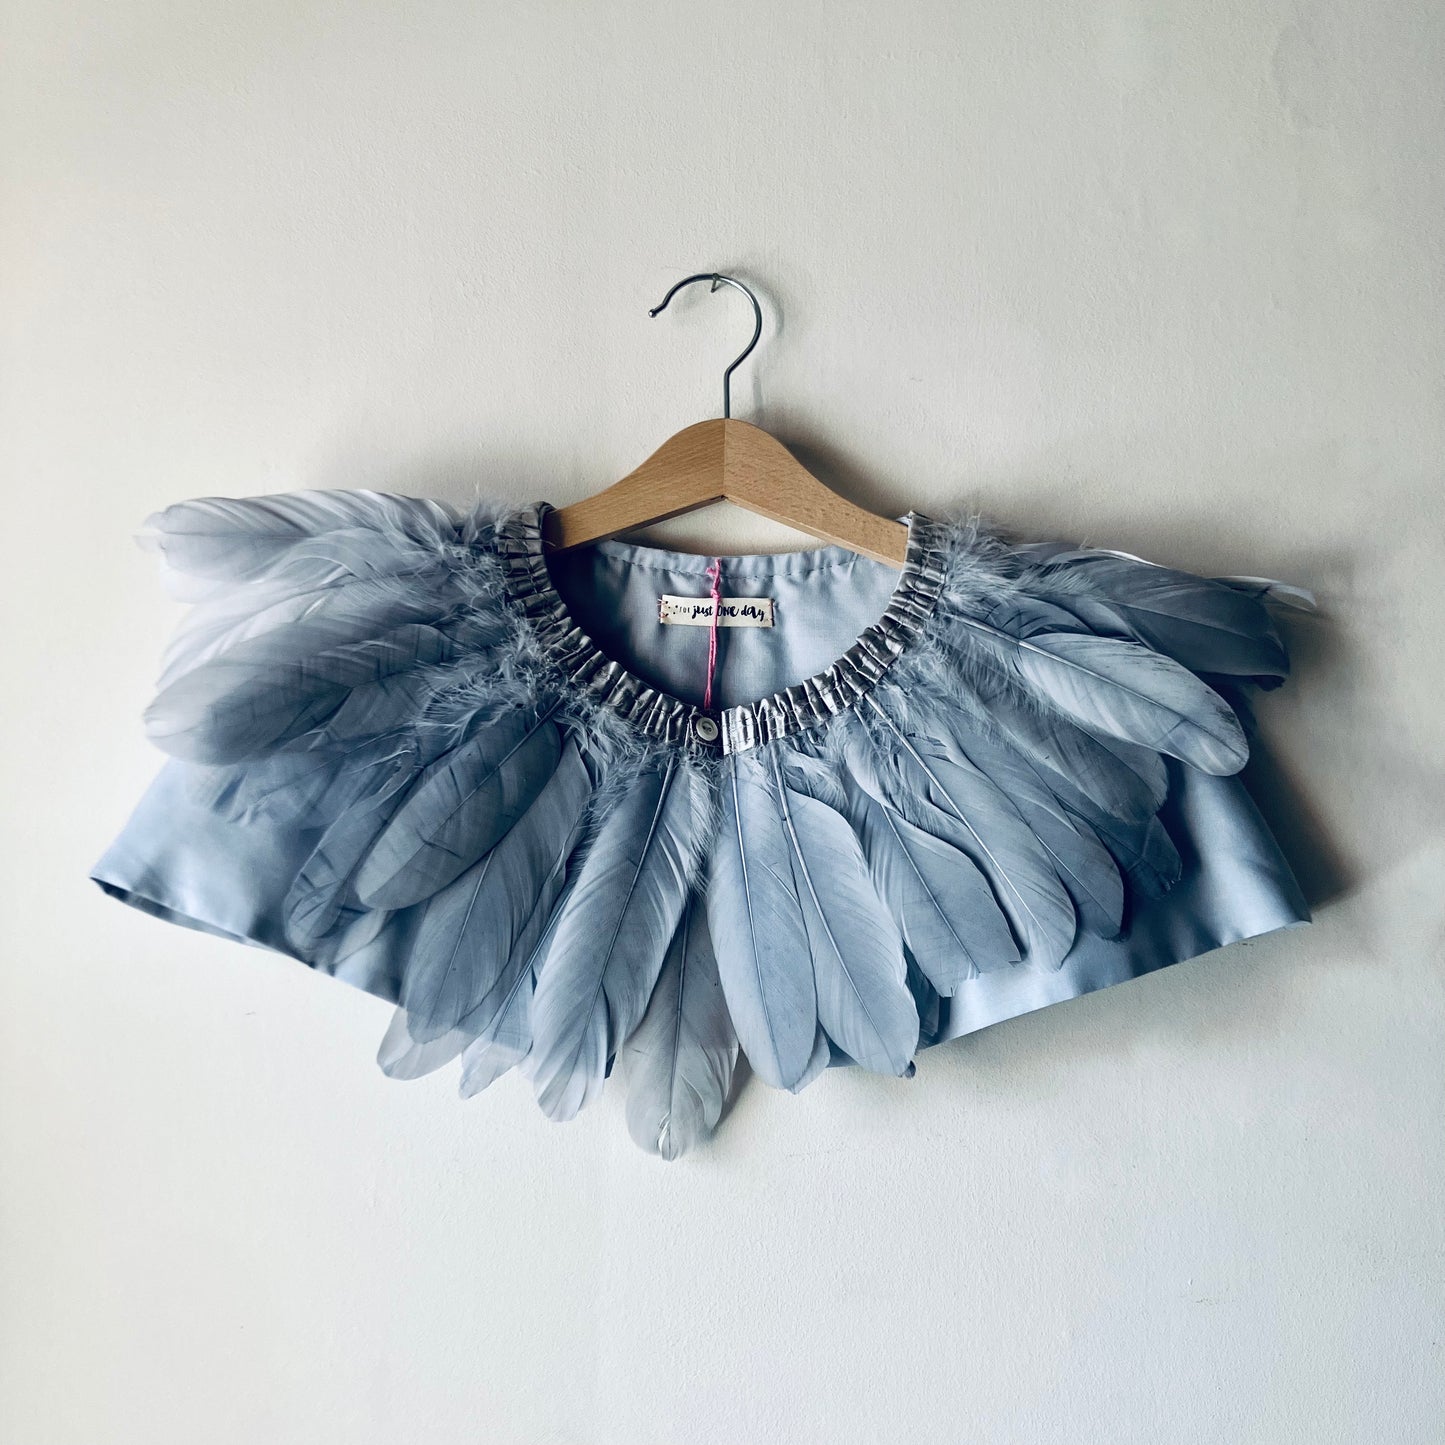 grey feather cape on wooden hanger against a white wall